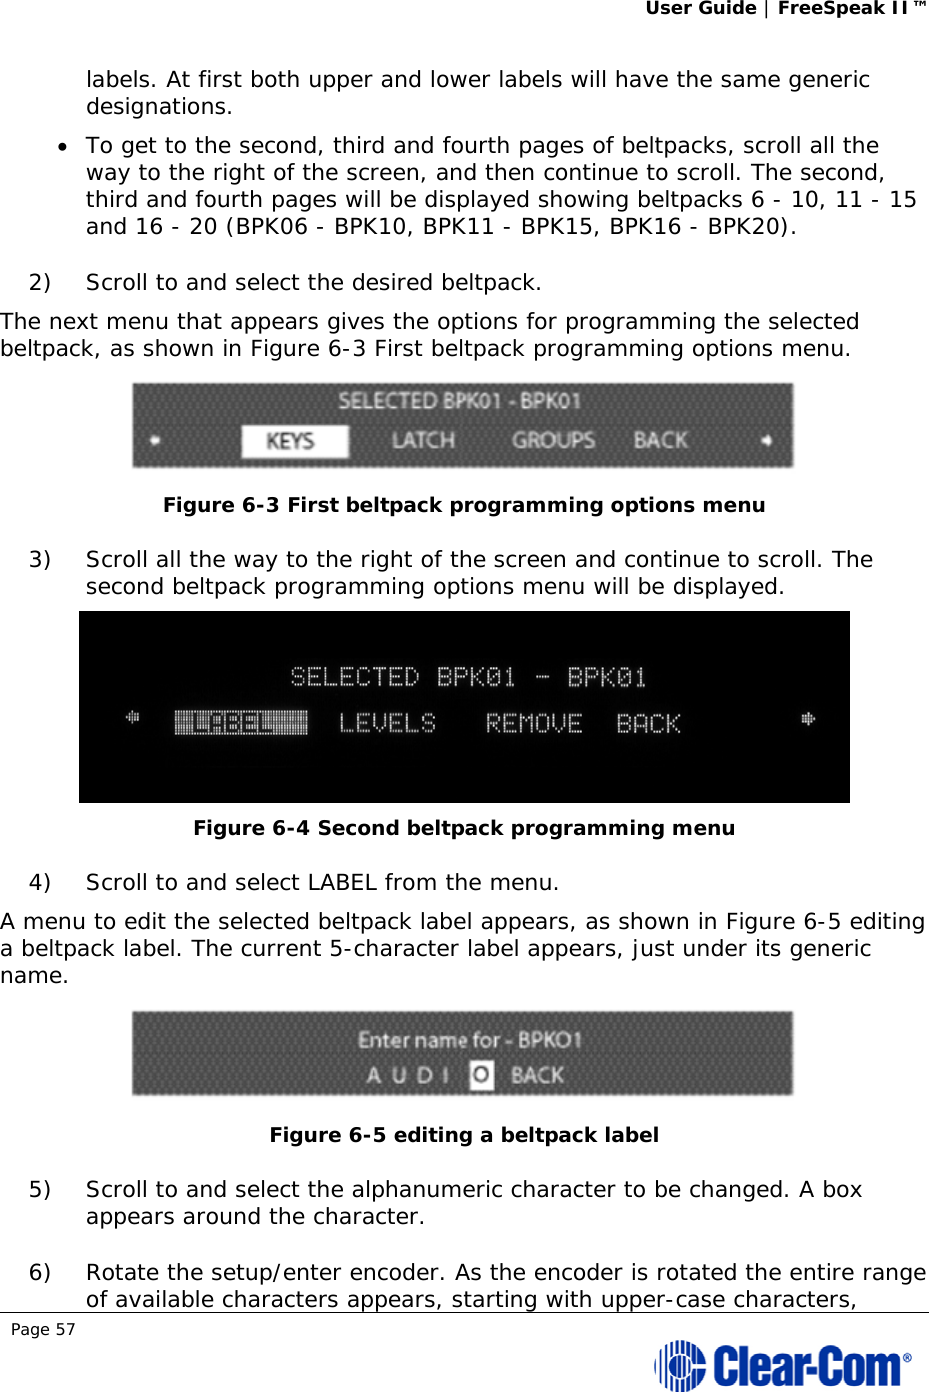 User Guide | FreeSpeak II™  Page 57  labels. At first both upper and lower labels will have the same generic designations.  To get to the second, third and fourth pages of beltpacks, scroll all the way to the right of the screen, and then continue to scroll. The second, third and fourth pages will be displayed showing beltpacks 6 - 10, 11 - 15 and 16 - 20 (BPK06 - BPK10, BPK11 - BPK15, BPK16 - BPK20). 2) Scroll to and select the desired beltpack.  The next menu that appears gives the options for programming the selected beltpack, as shown in Figure 6-3 First beltpack programming options menu.  Figure 6-3 First beltpack programming options menu 3) Scroll all the way to the right of the screen and continue to scroll. The second beltpack programming options menu will be displayed.  Figure 6-4 Second beltpack programming menu 4) Scroll to and select LABEL from the menu.  A menu to edit the selected beltpack label appears, as shown in Figure 6-5 editing a beltpack label. The current 5-character label appears, just under its generic name.  Figure 6-5 editing a beltpack label 5) Scroll to and select the alphanumeric character to be changed. A box appears around the character. 6) Rotate the setup/enter encoder. As the encoder is rotated the entire range of available characters appears, starting with upper-case characters, 